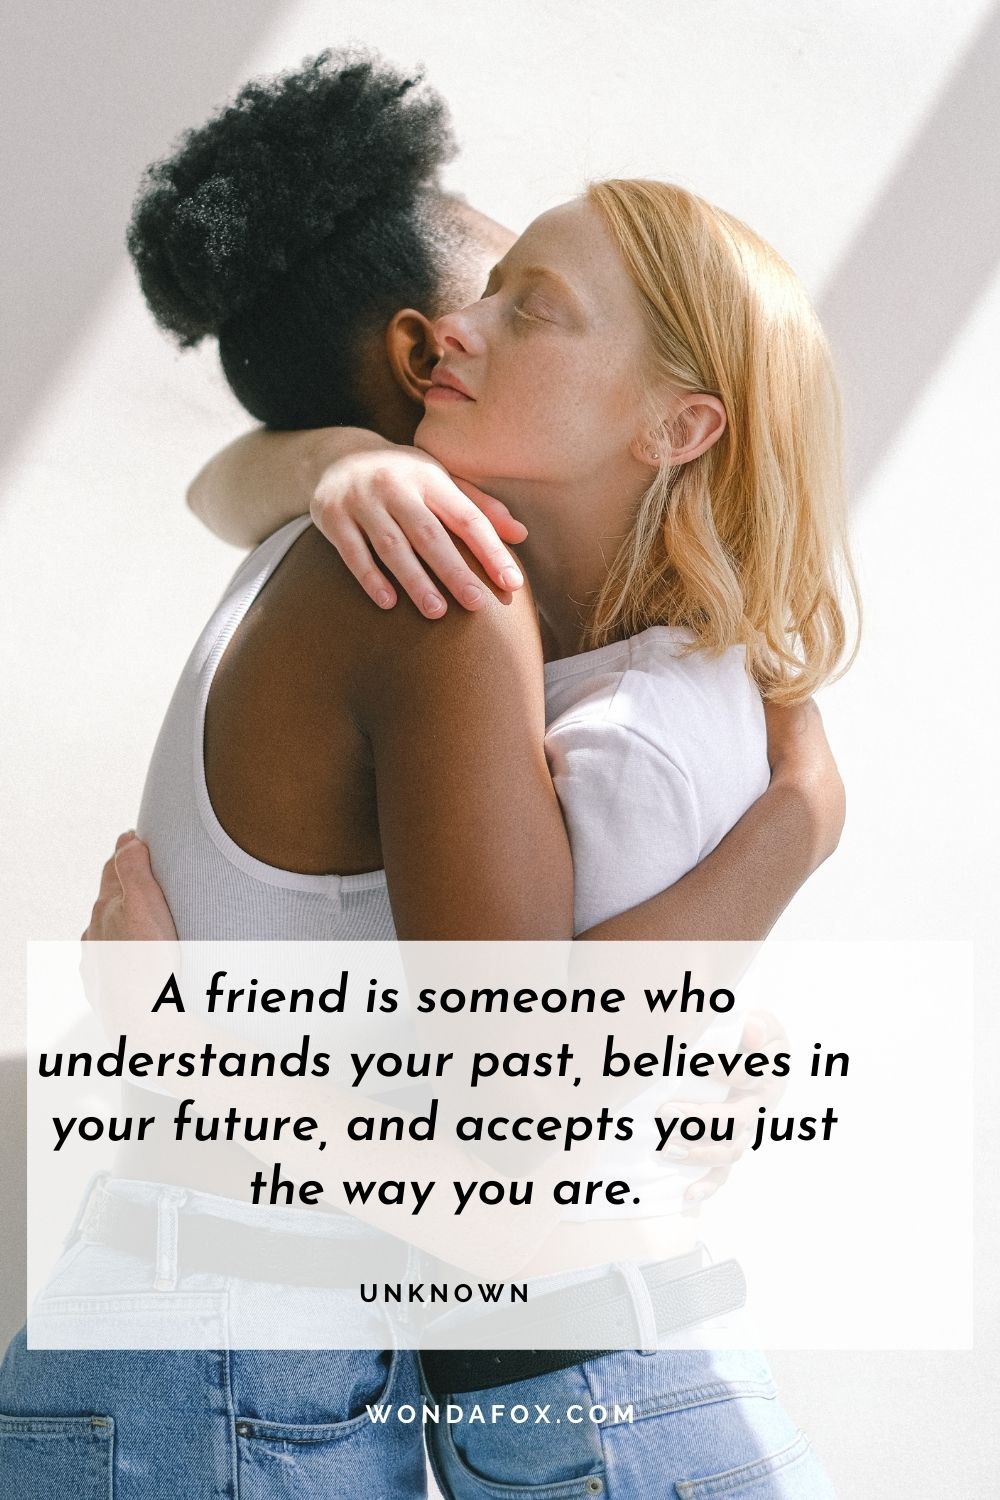 A friend is someone who understands your past, believes in your future, and accepts you just the way you are.